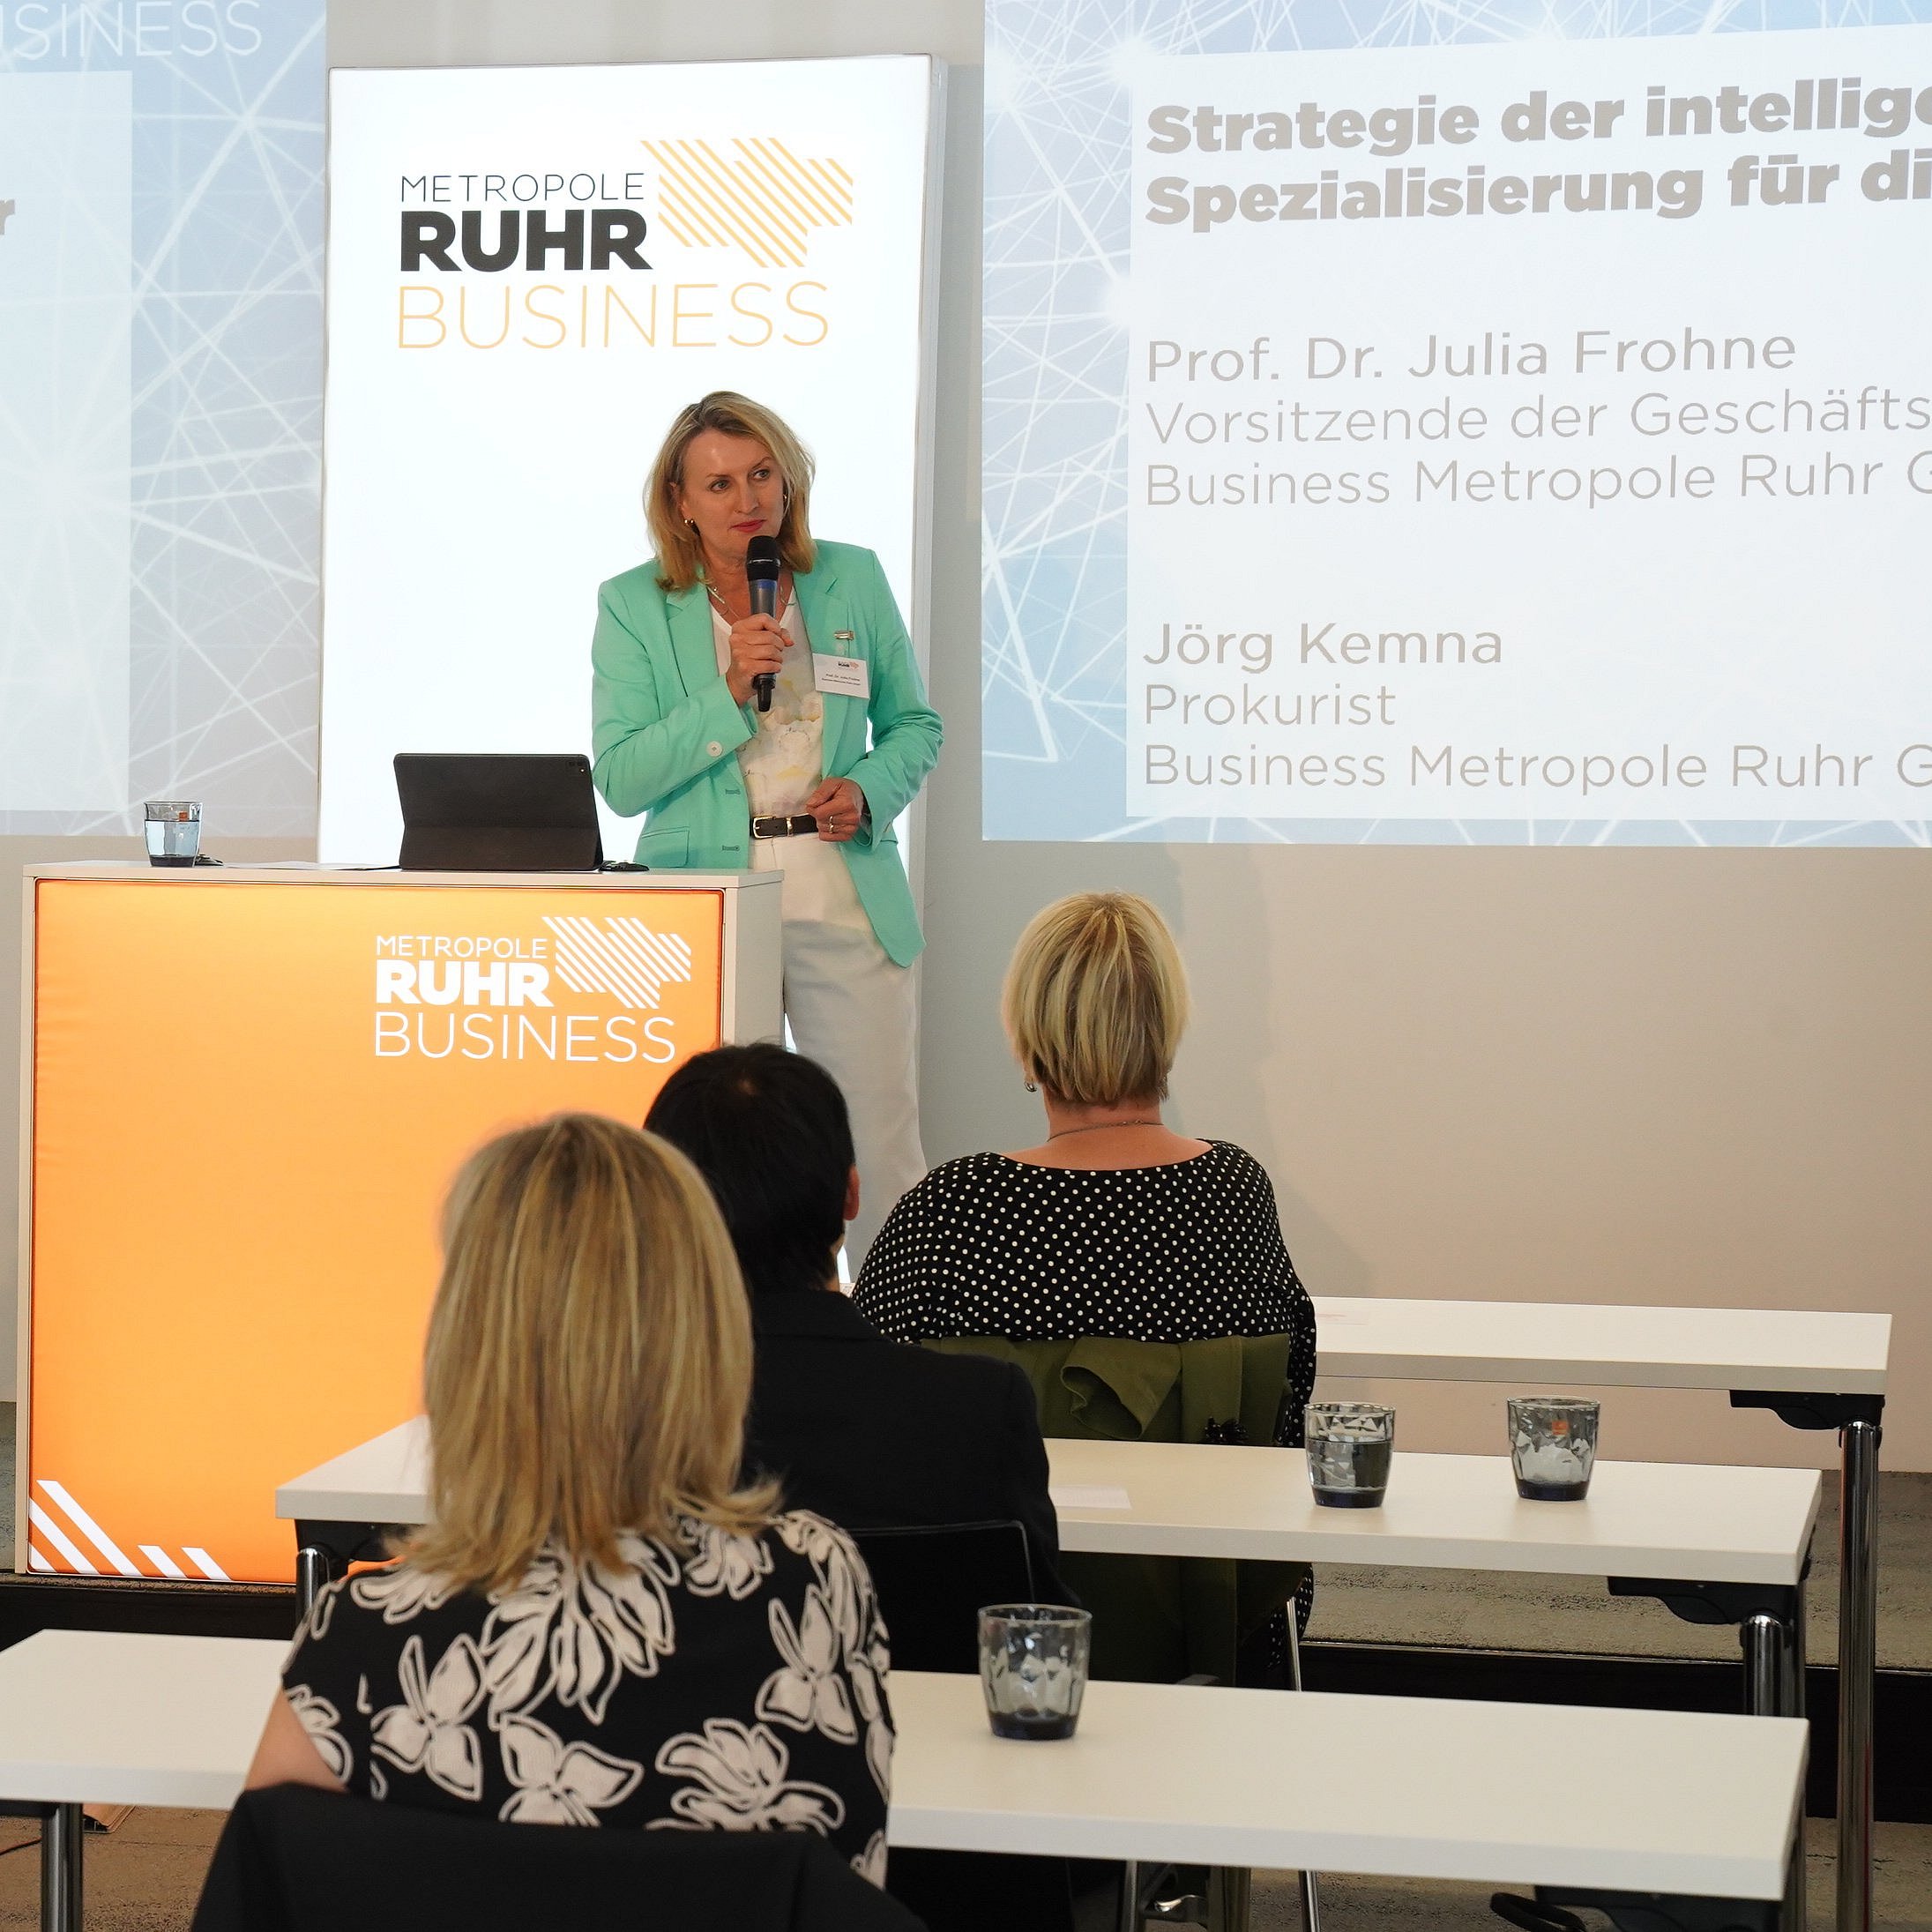 Prof. Dr. Julia Frohne presents the S3 strategy for future markets to all stakeholders in the Ruhr region